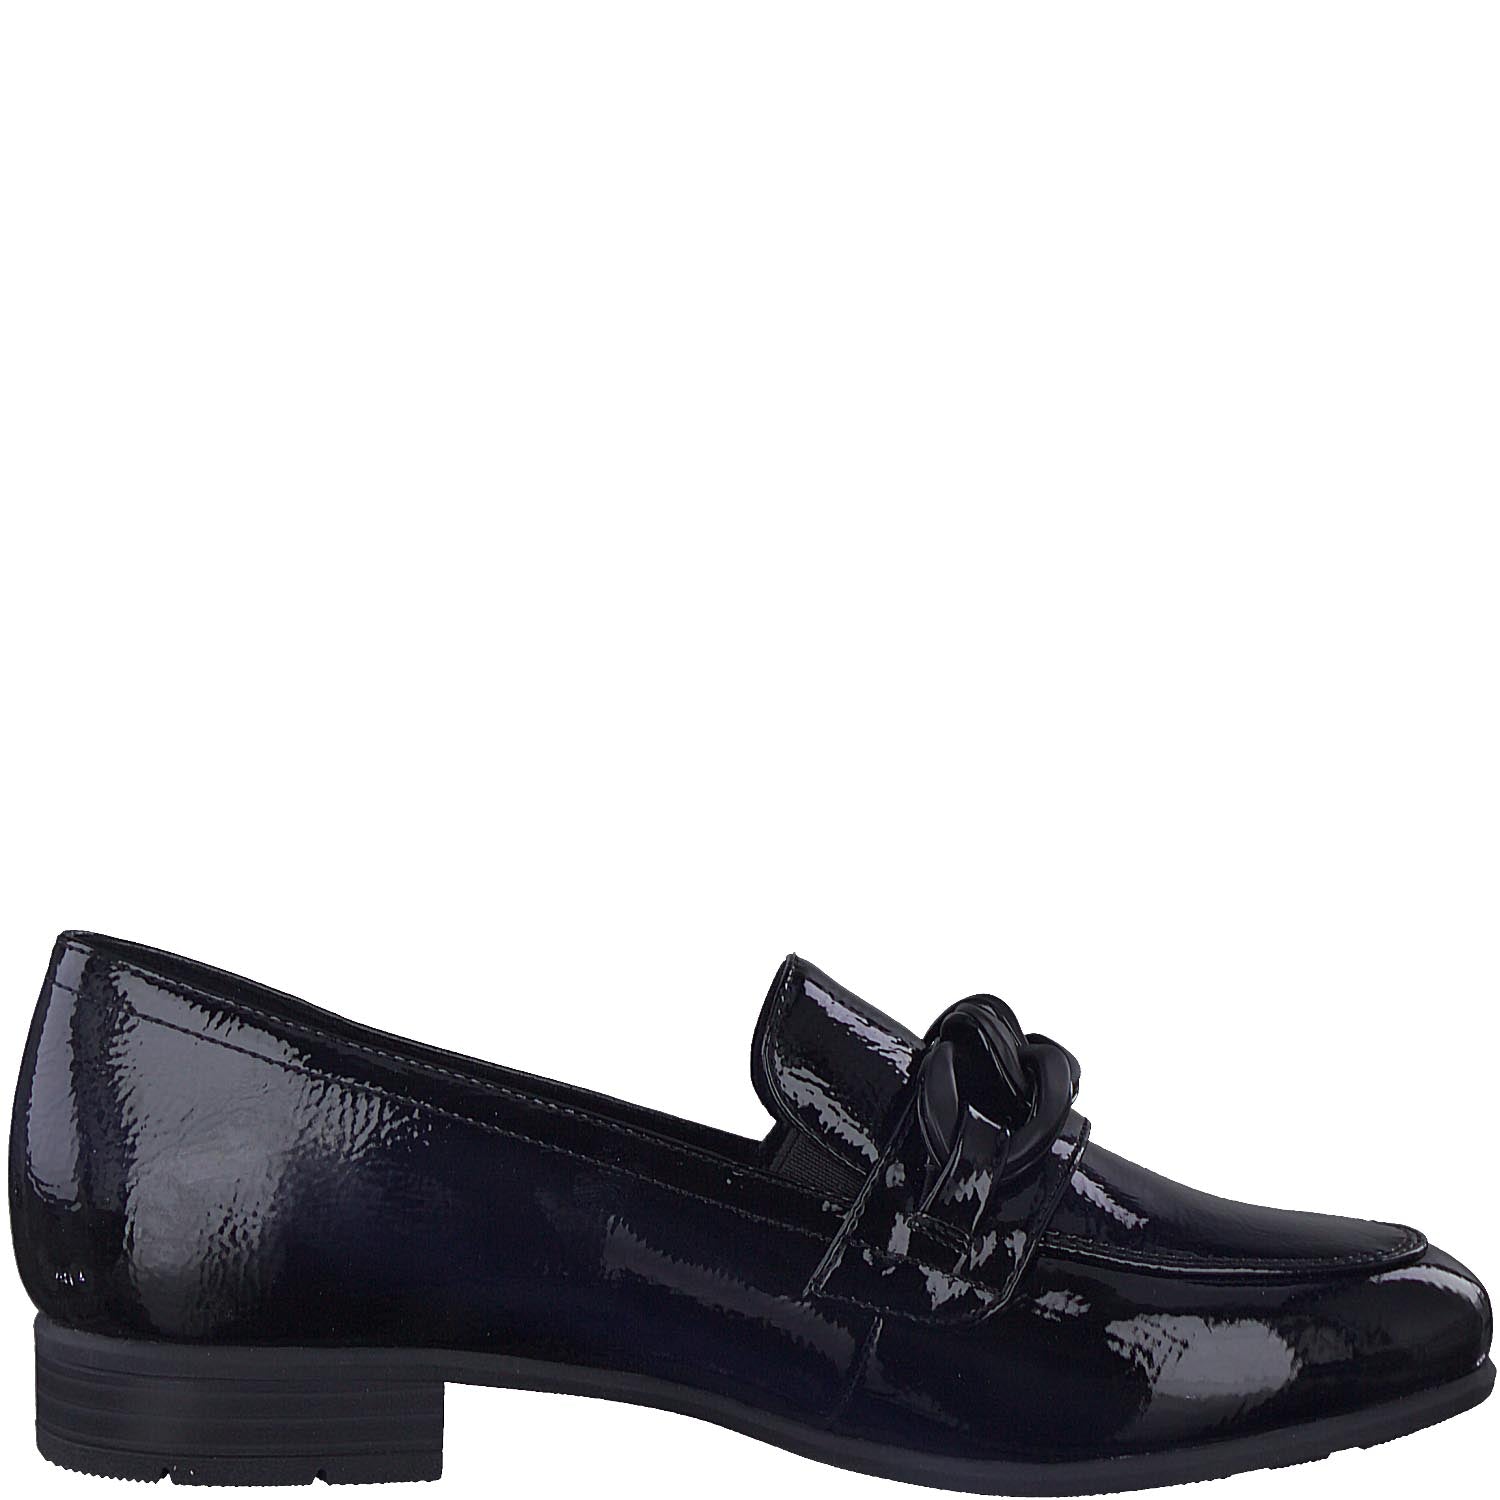 Side view of the inside of Jana Black Patent Loafer showing the wide fitting.